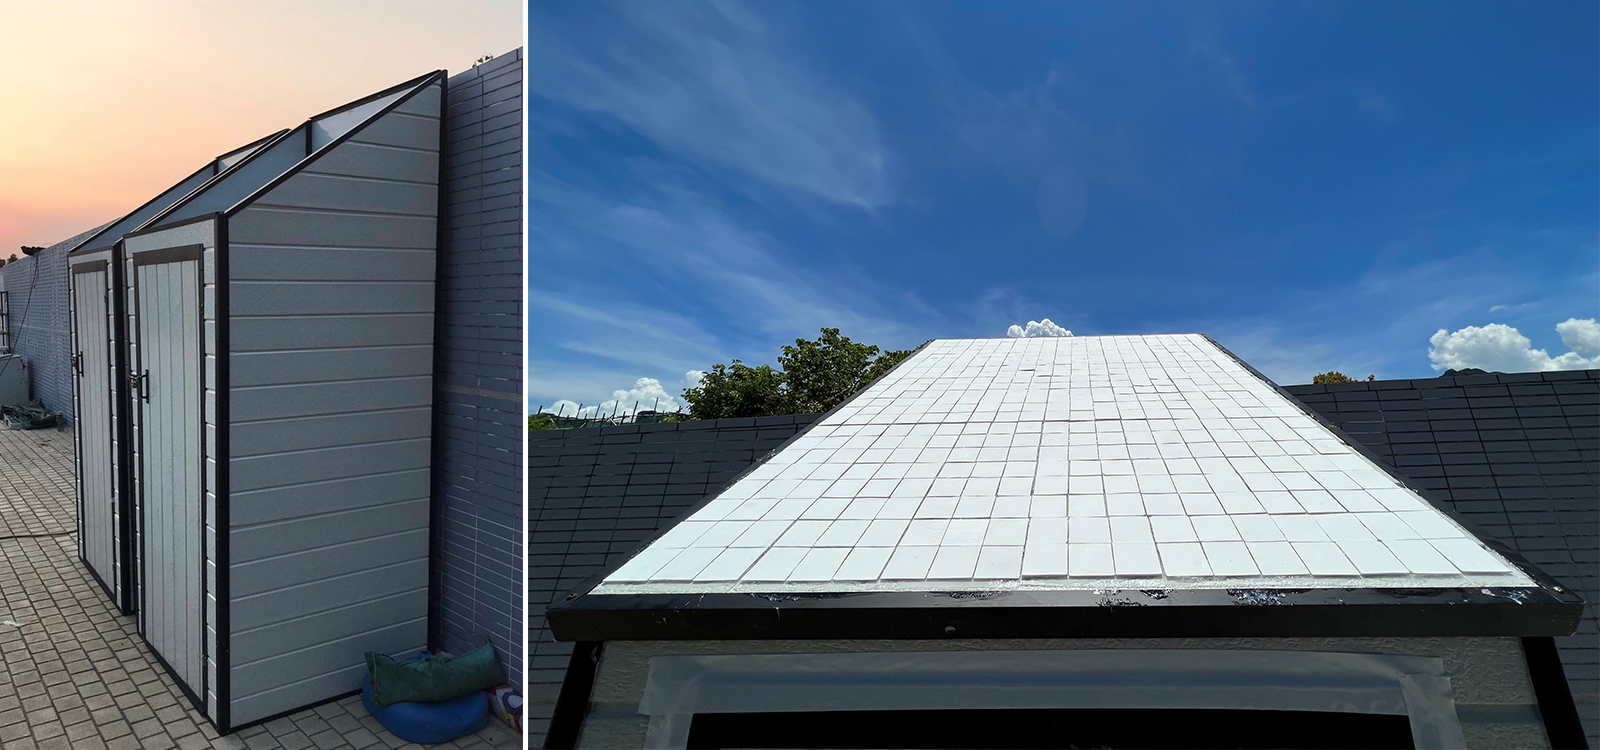 Application in a building envelope, with the white cooling ceramic applied on the roof.